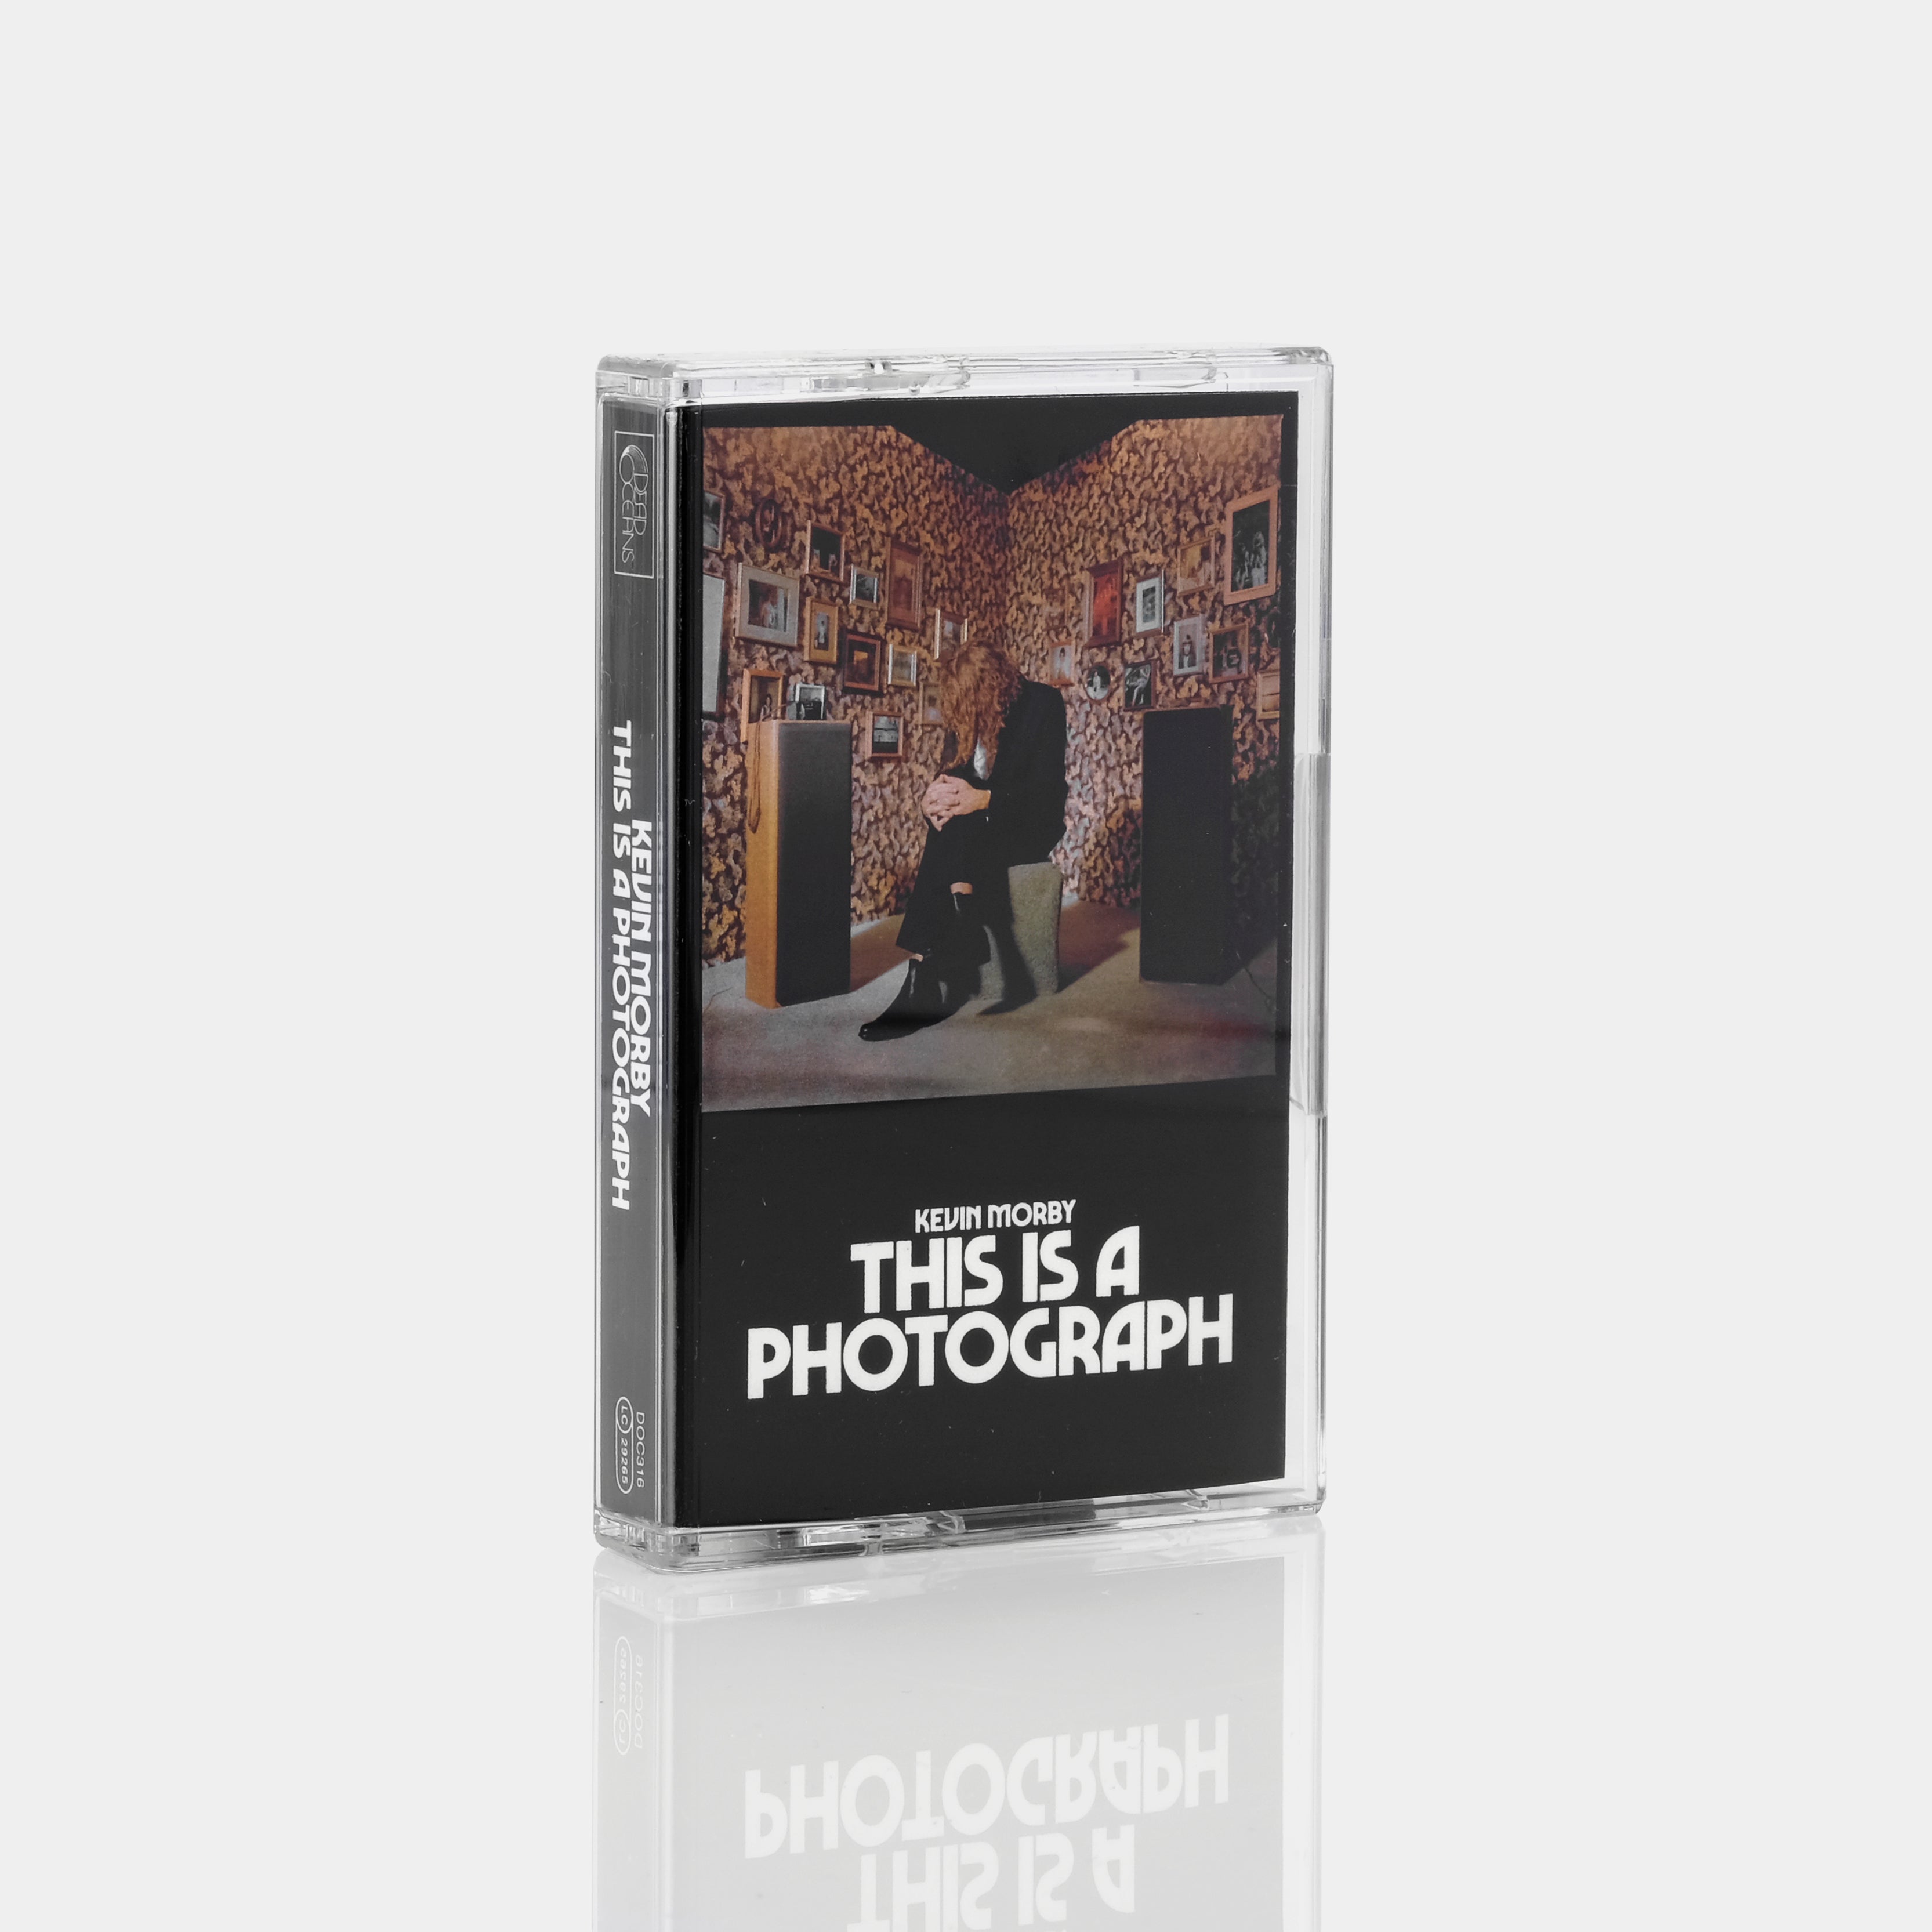 Kevin Morby - This Is A Photograph Cassette Tape